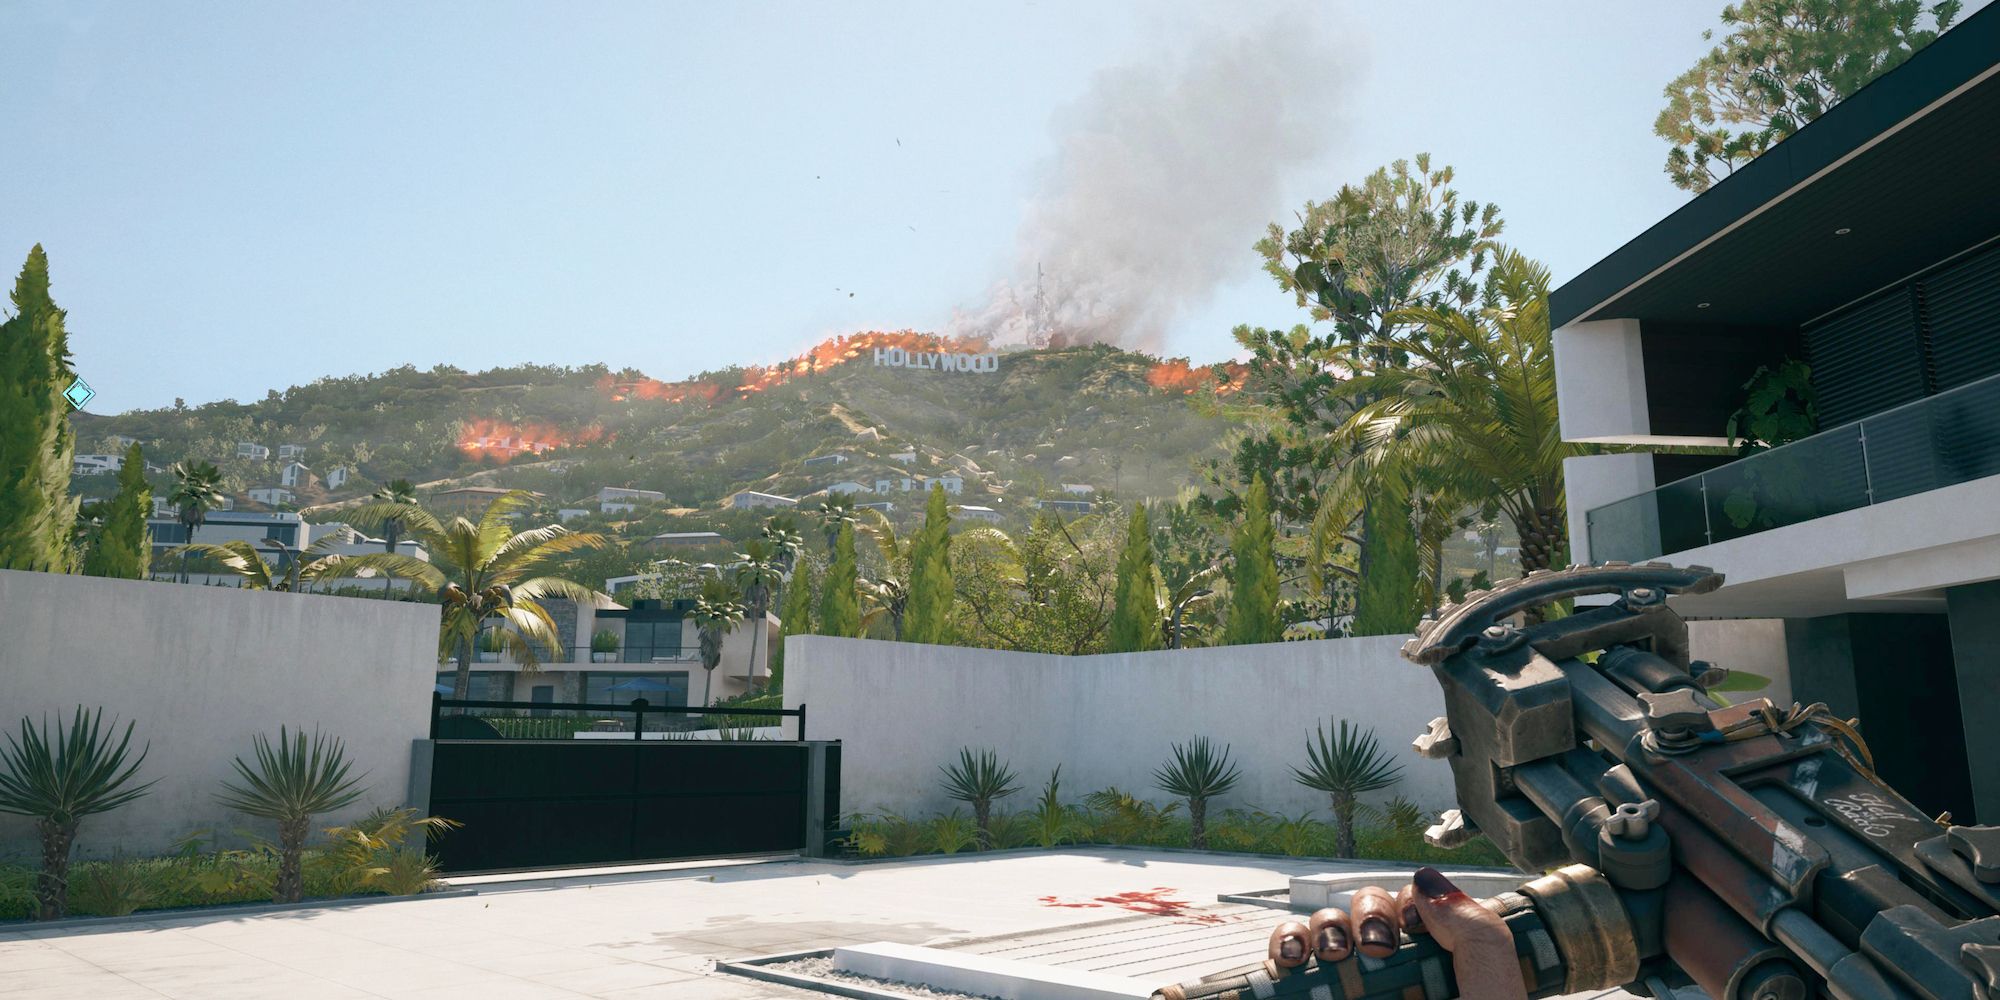 A view of the burning Hollywood sign on Dead Island 2.